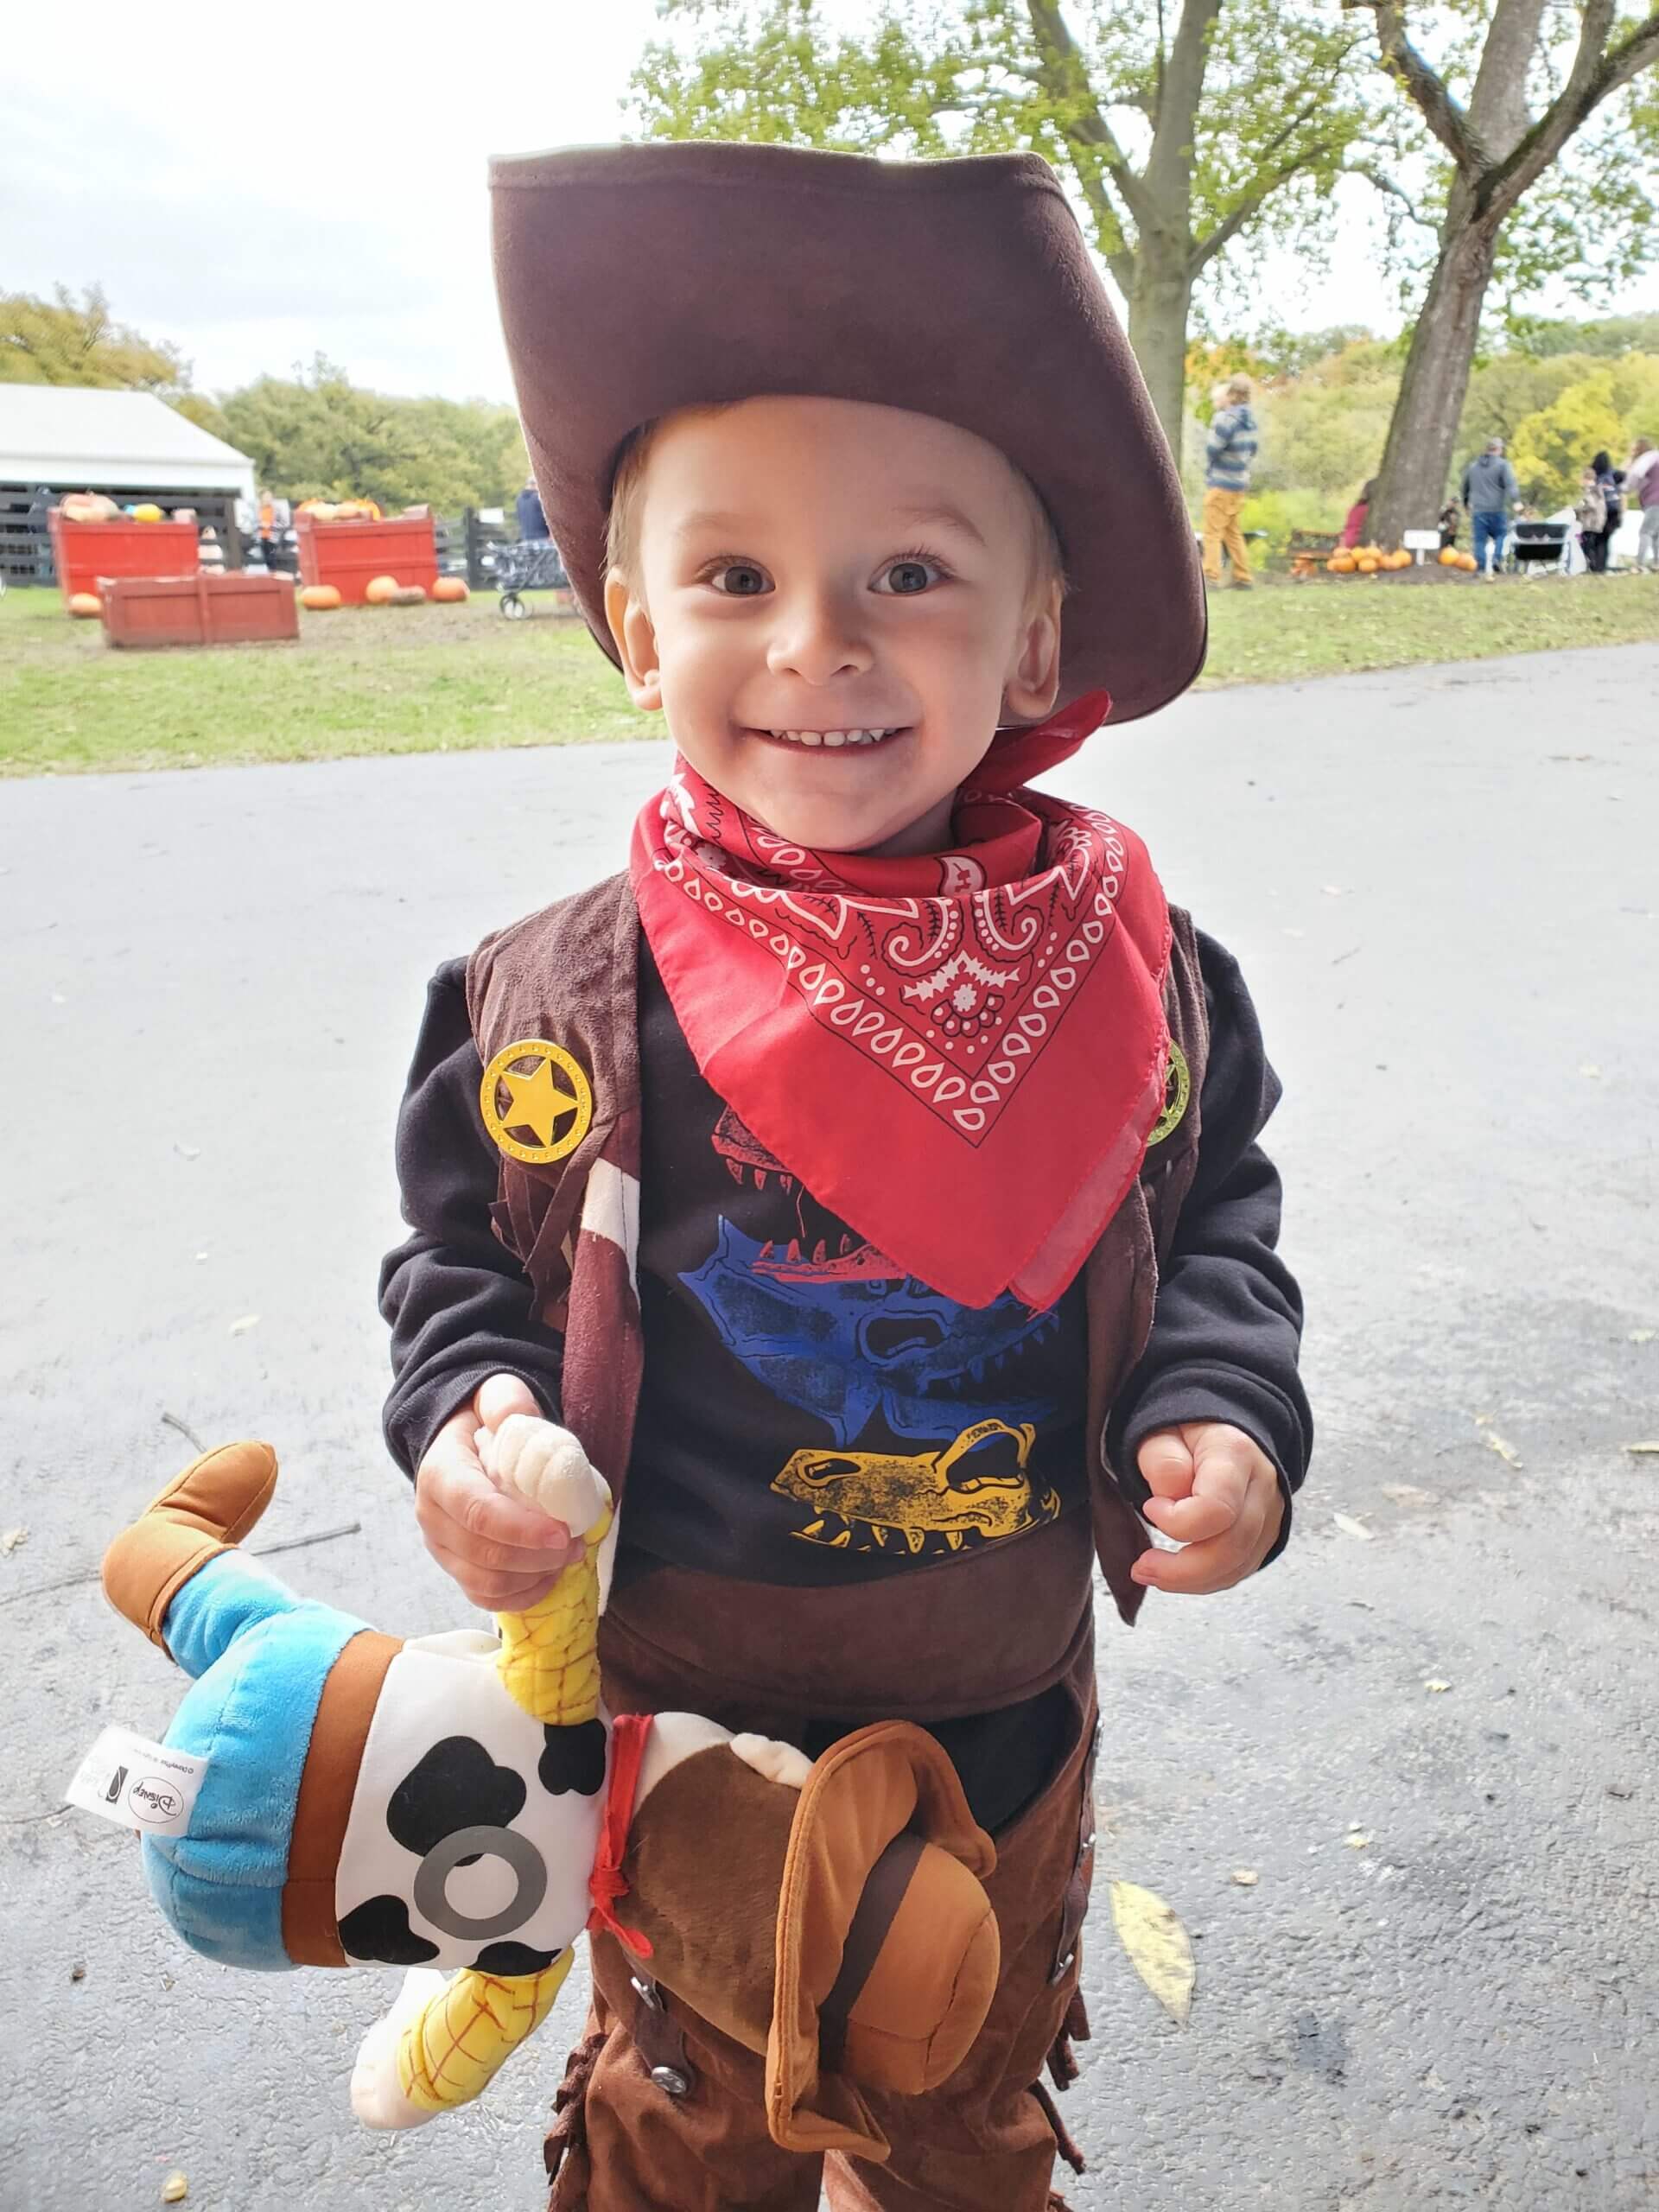 Great Cowboy Hat & Costume Ideas For Kids To Wear